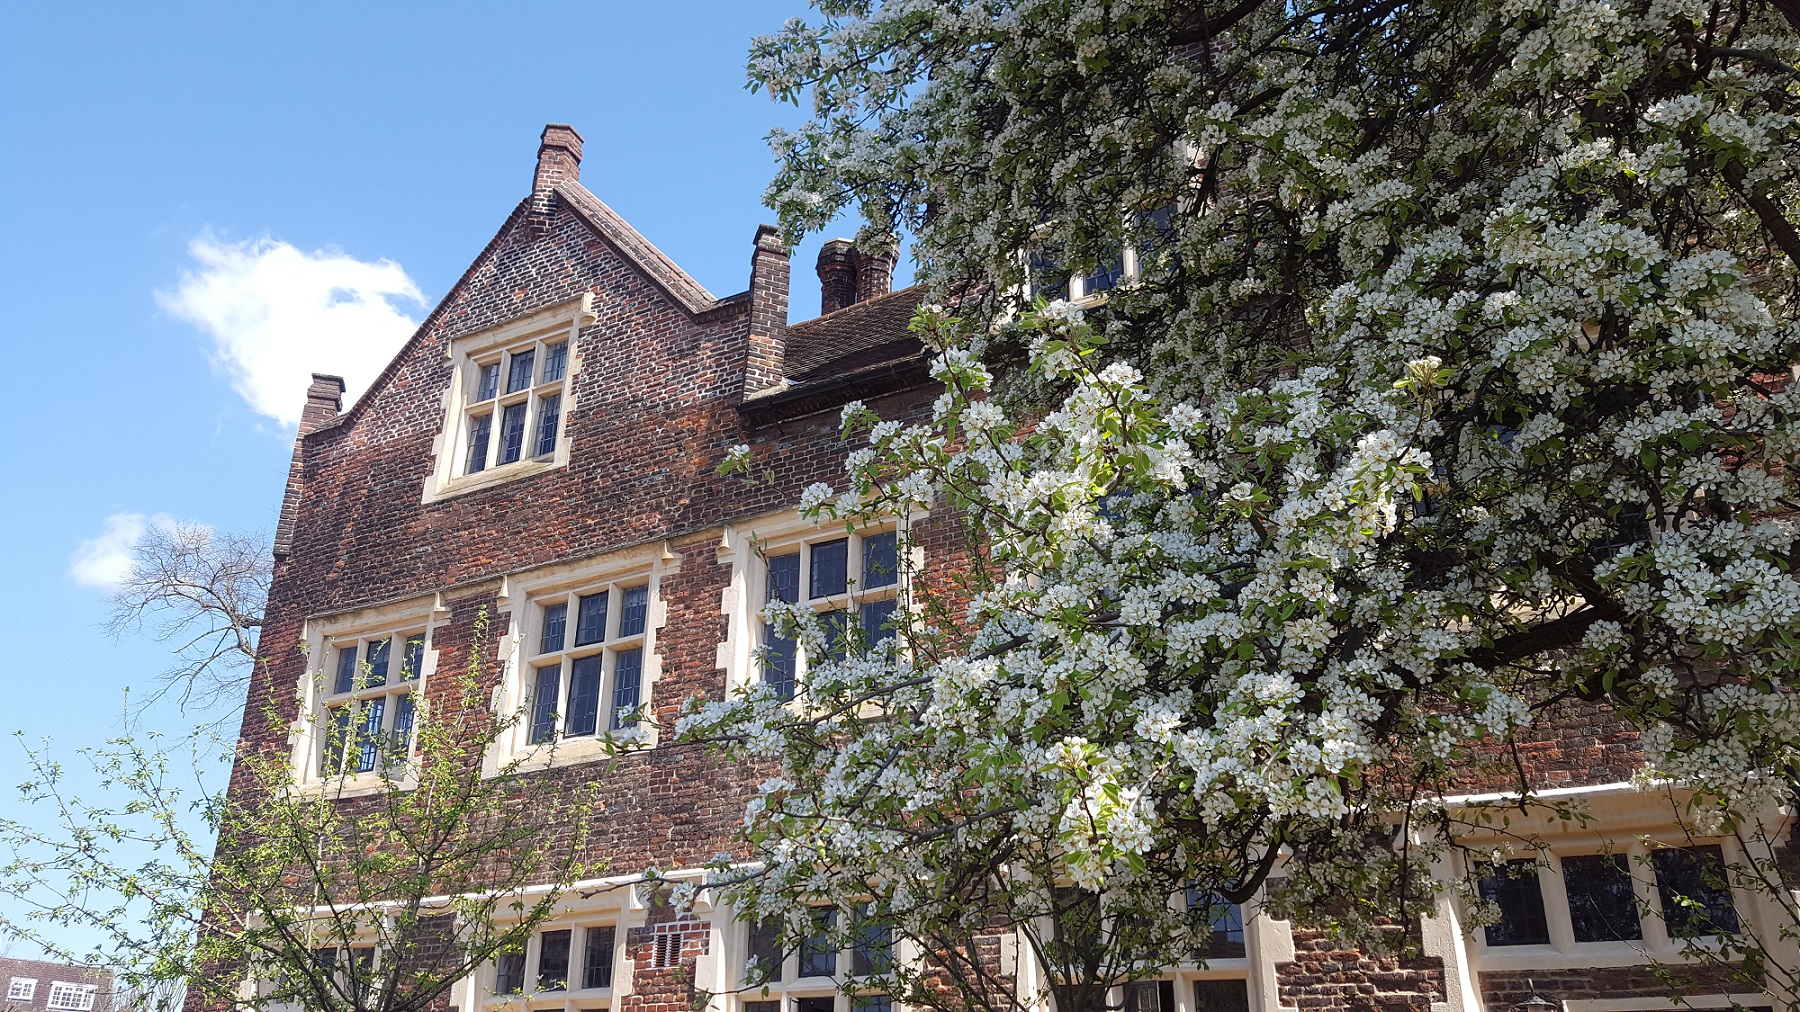 Eastbury with spring flowers